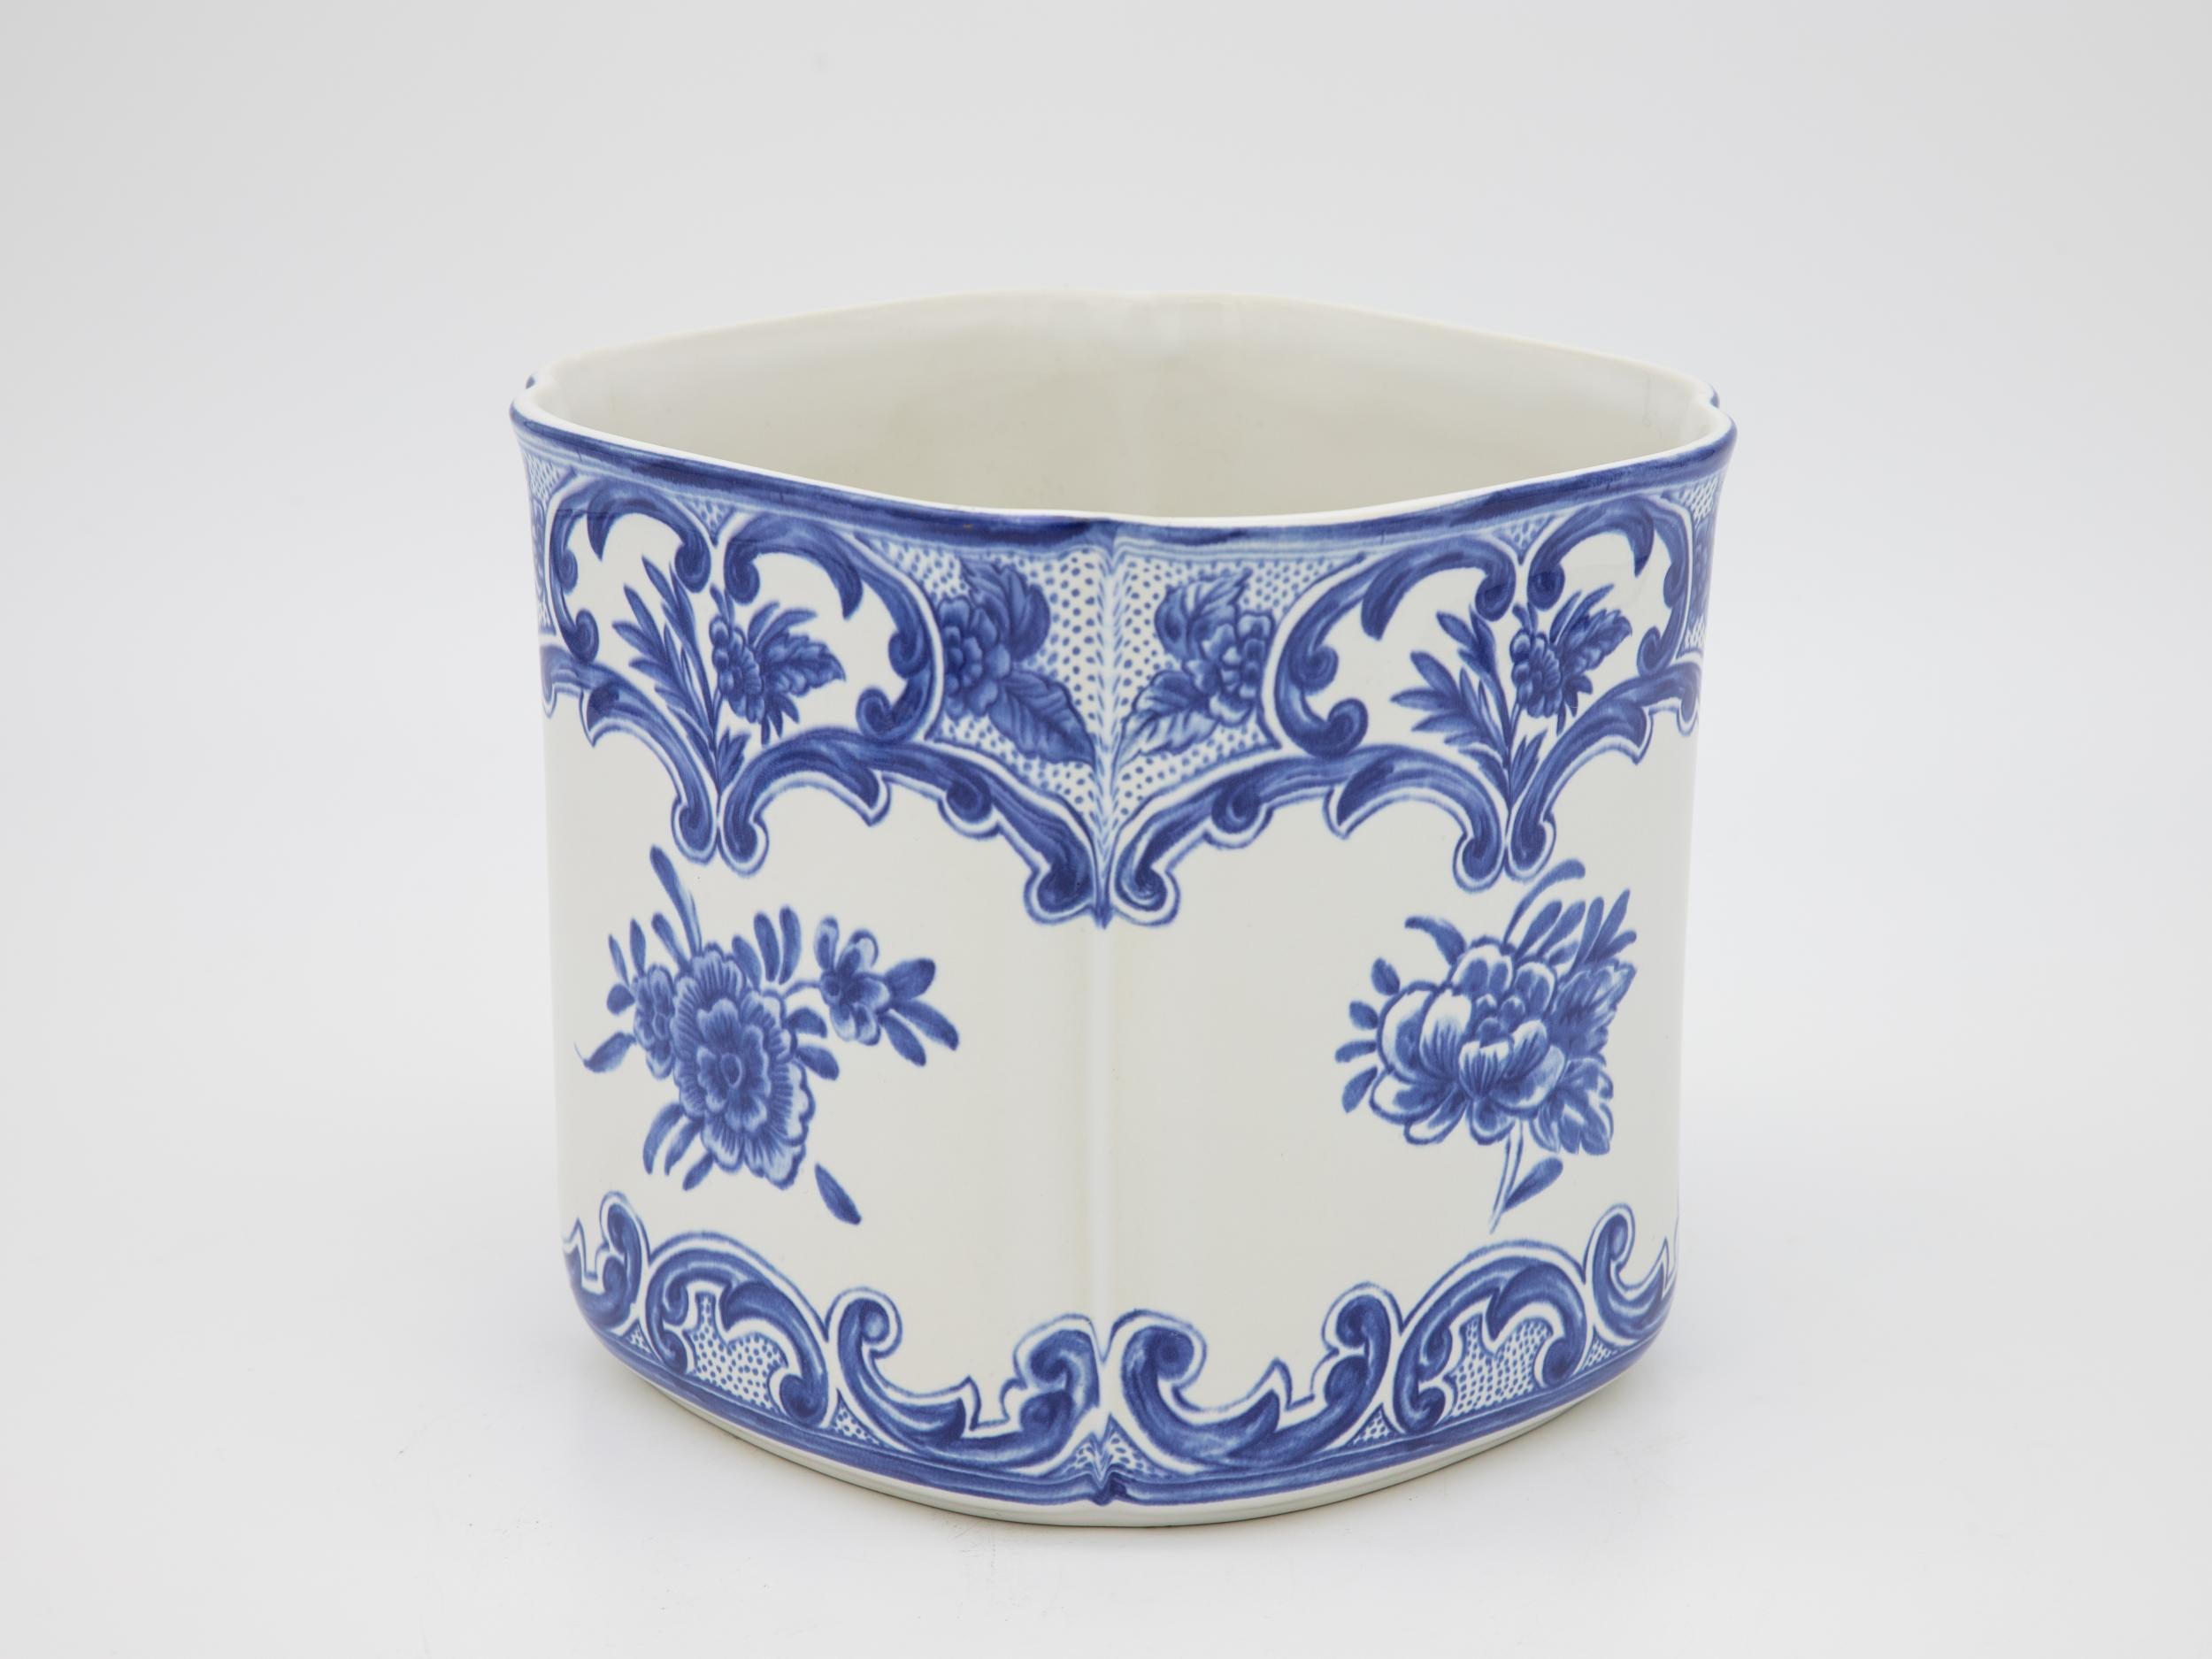 A blue and white Tiffany & Co cachepot in a square shape. Roses, flowers, and motif in the Delft style. This cachepot is stamped with the Tiffany & Co maker's mark and the year 1996.